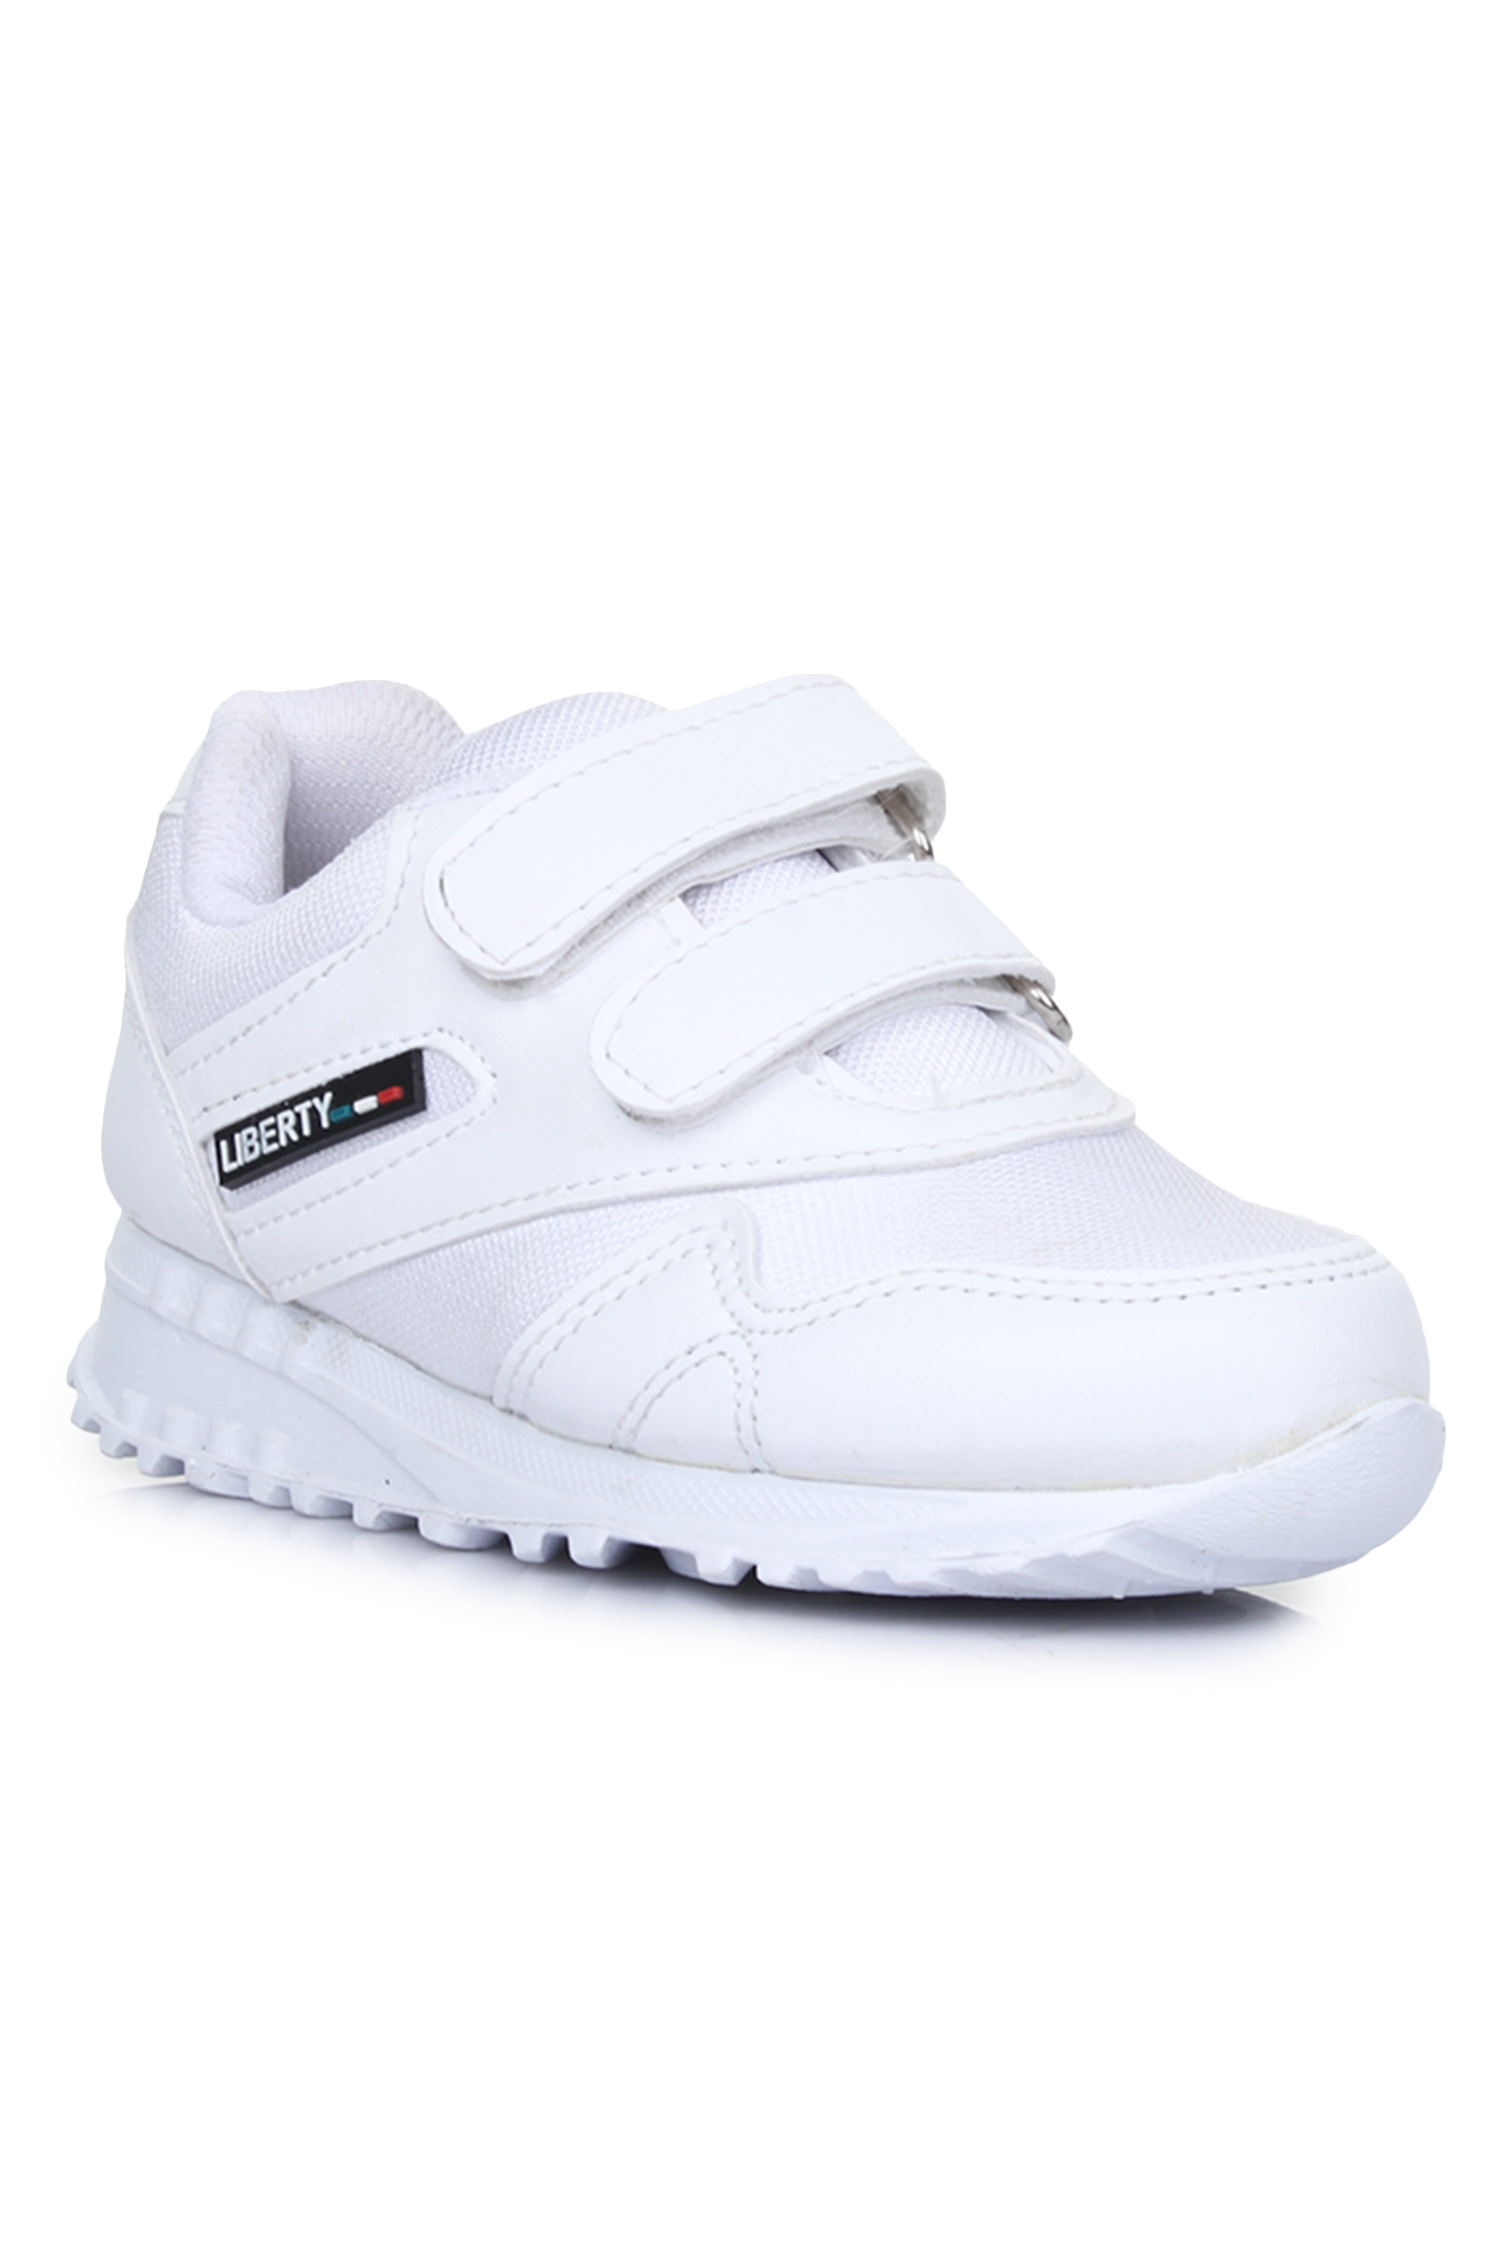 Liberty | Liberty Force 10 White School Shoes 9906-90VGN_White For - Boys